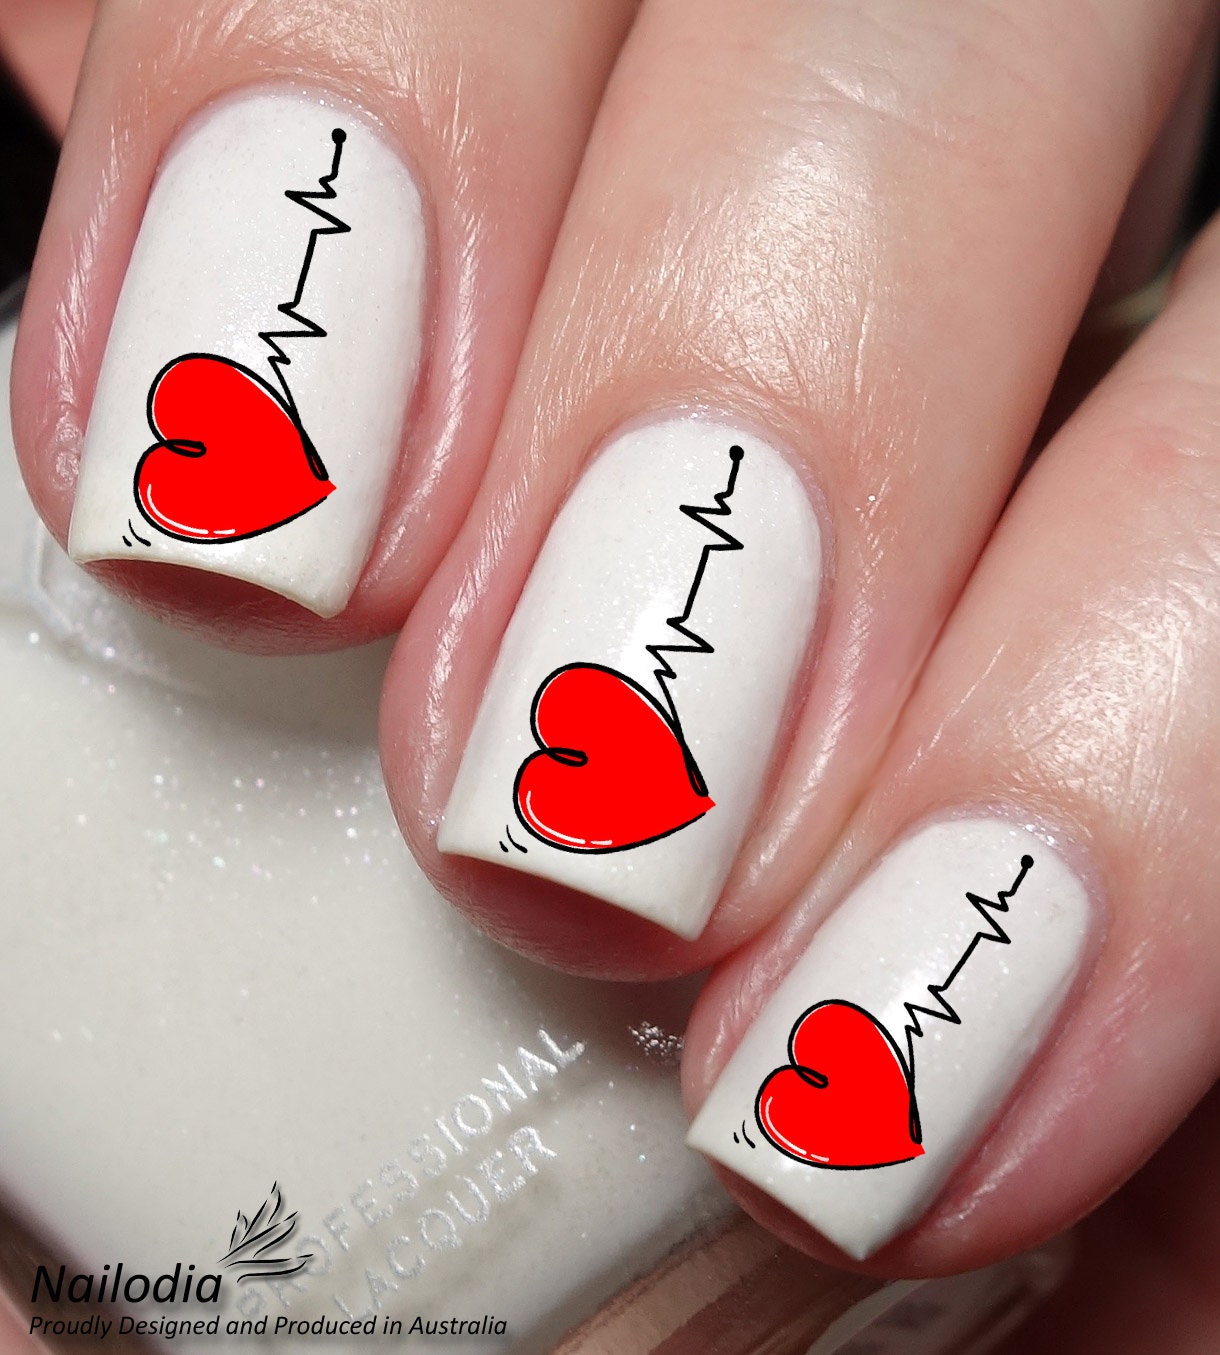 Valentine's Day Nails | Black Lace with Heart Beat EKG Nail Art Design -  YouTube